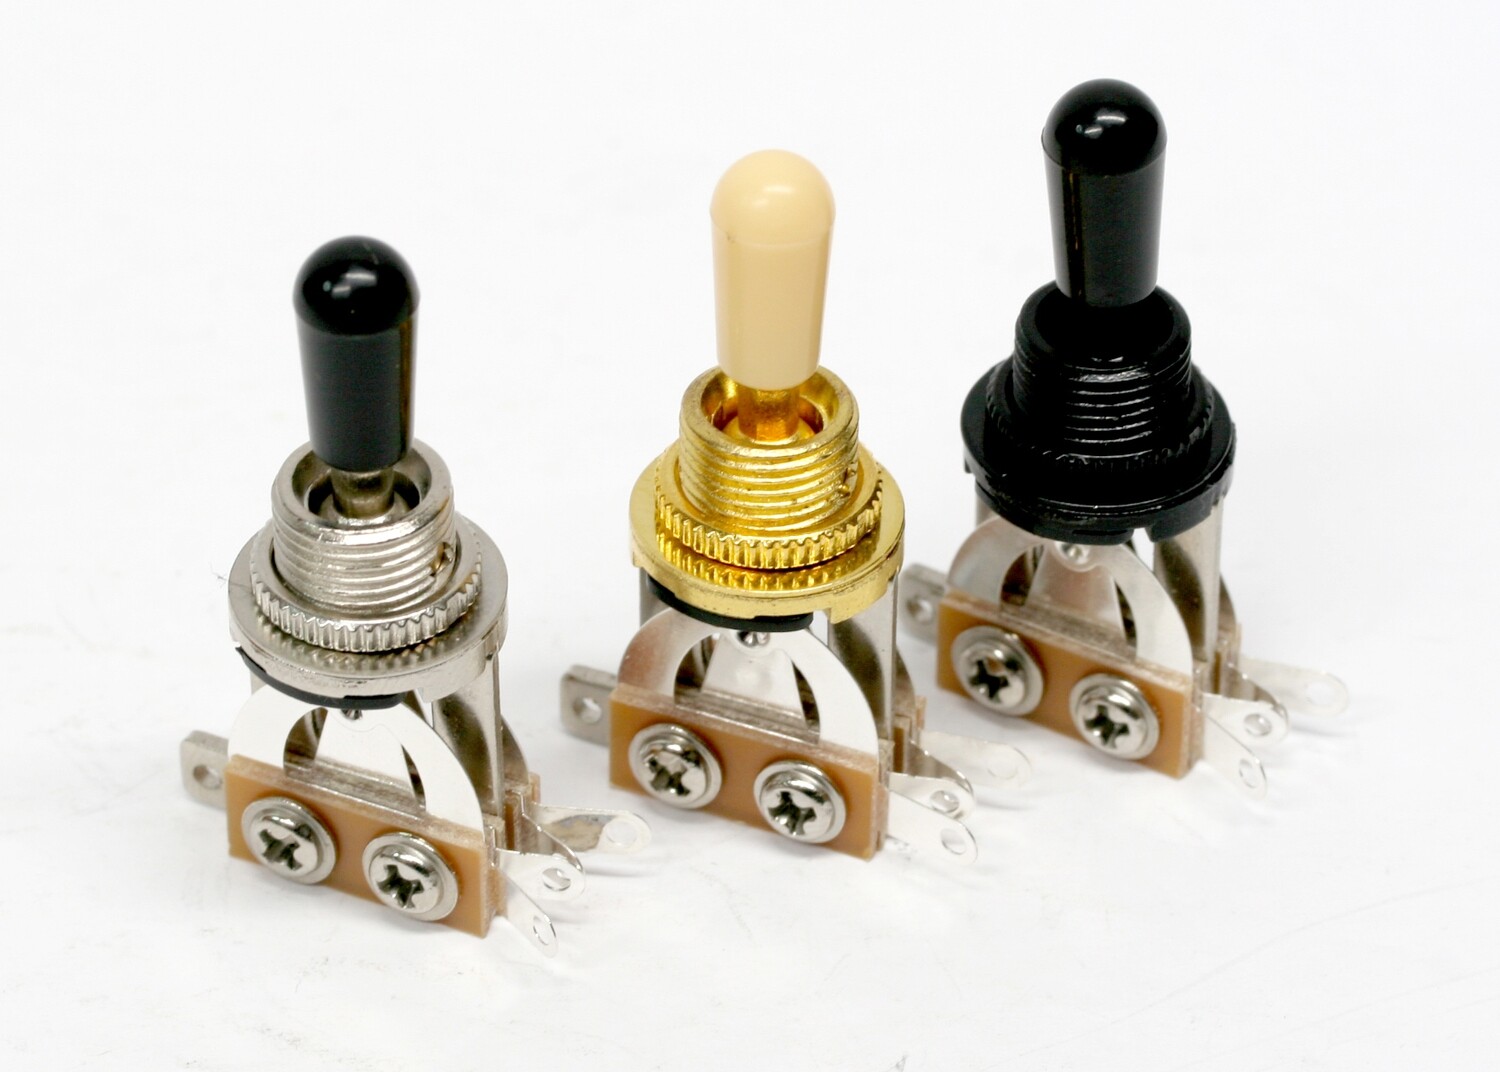 Brio Metric 3 Way Short Straight Toggle Switch, Gold, Black or Chrome Top with Cream Tip or Black Tip